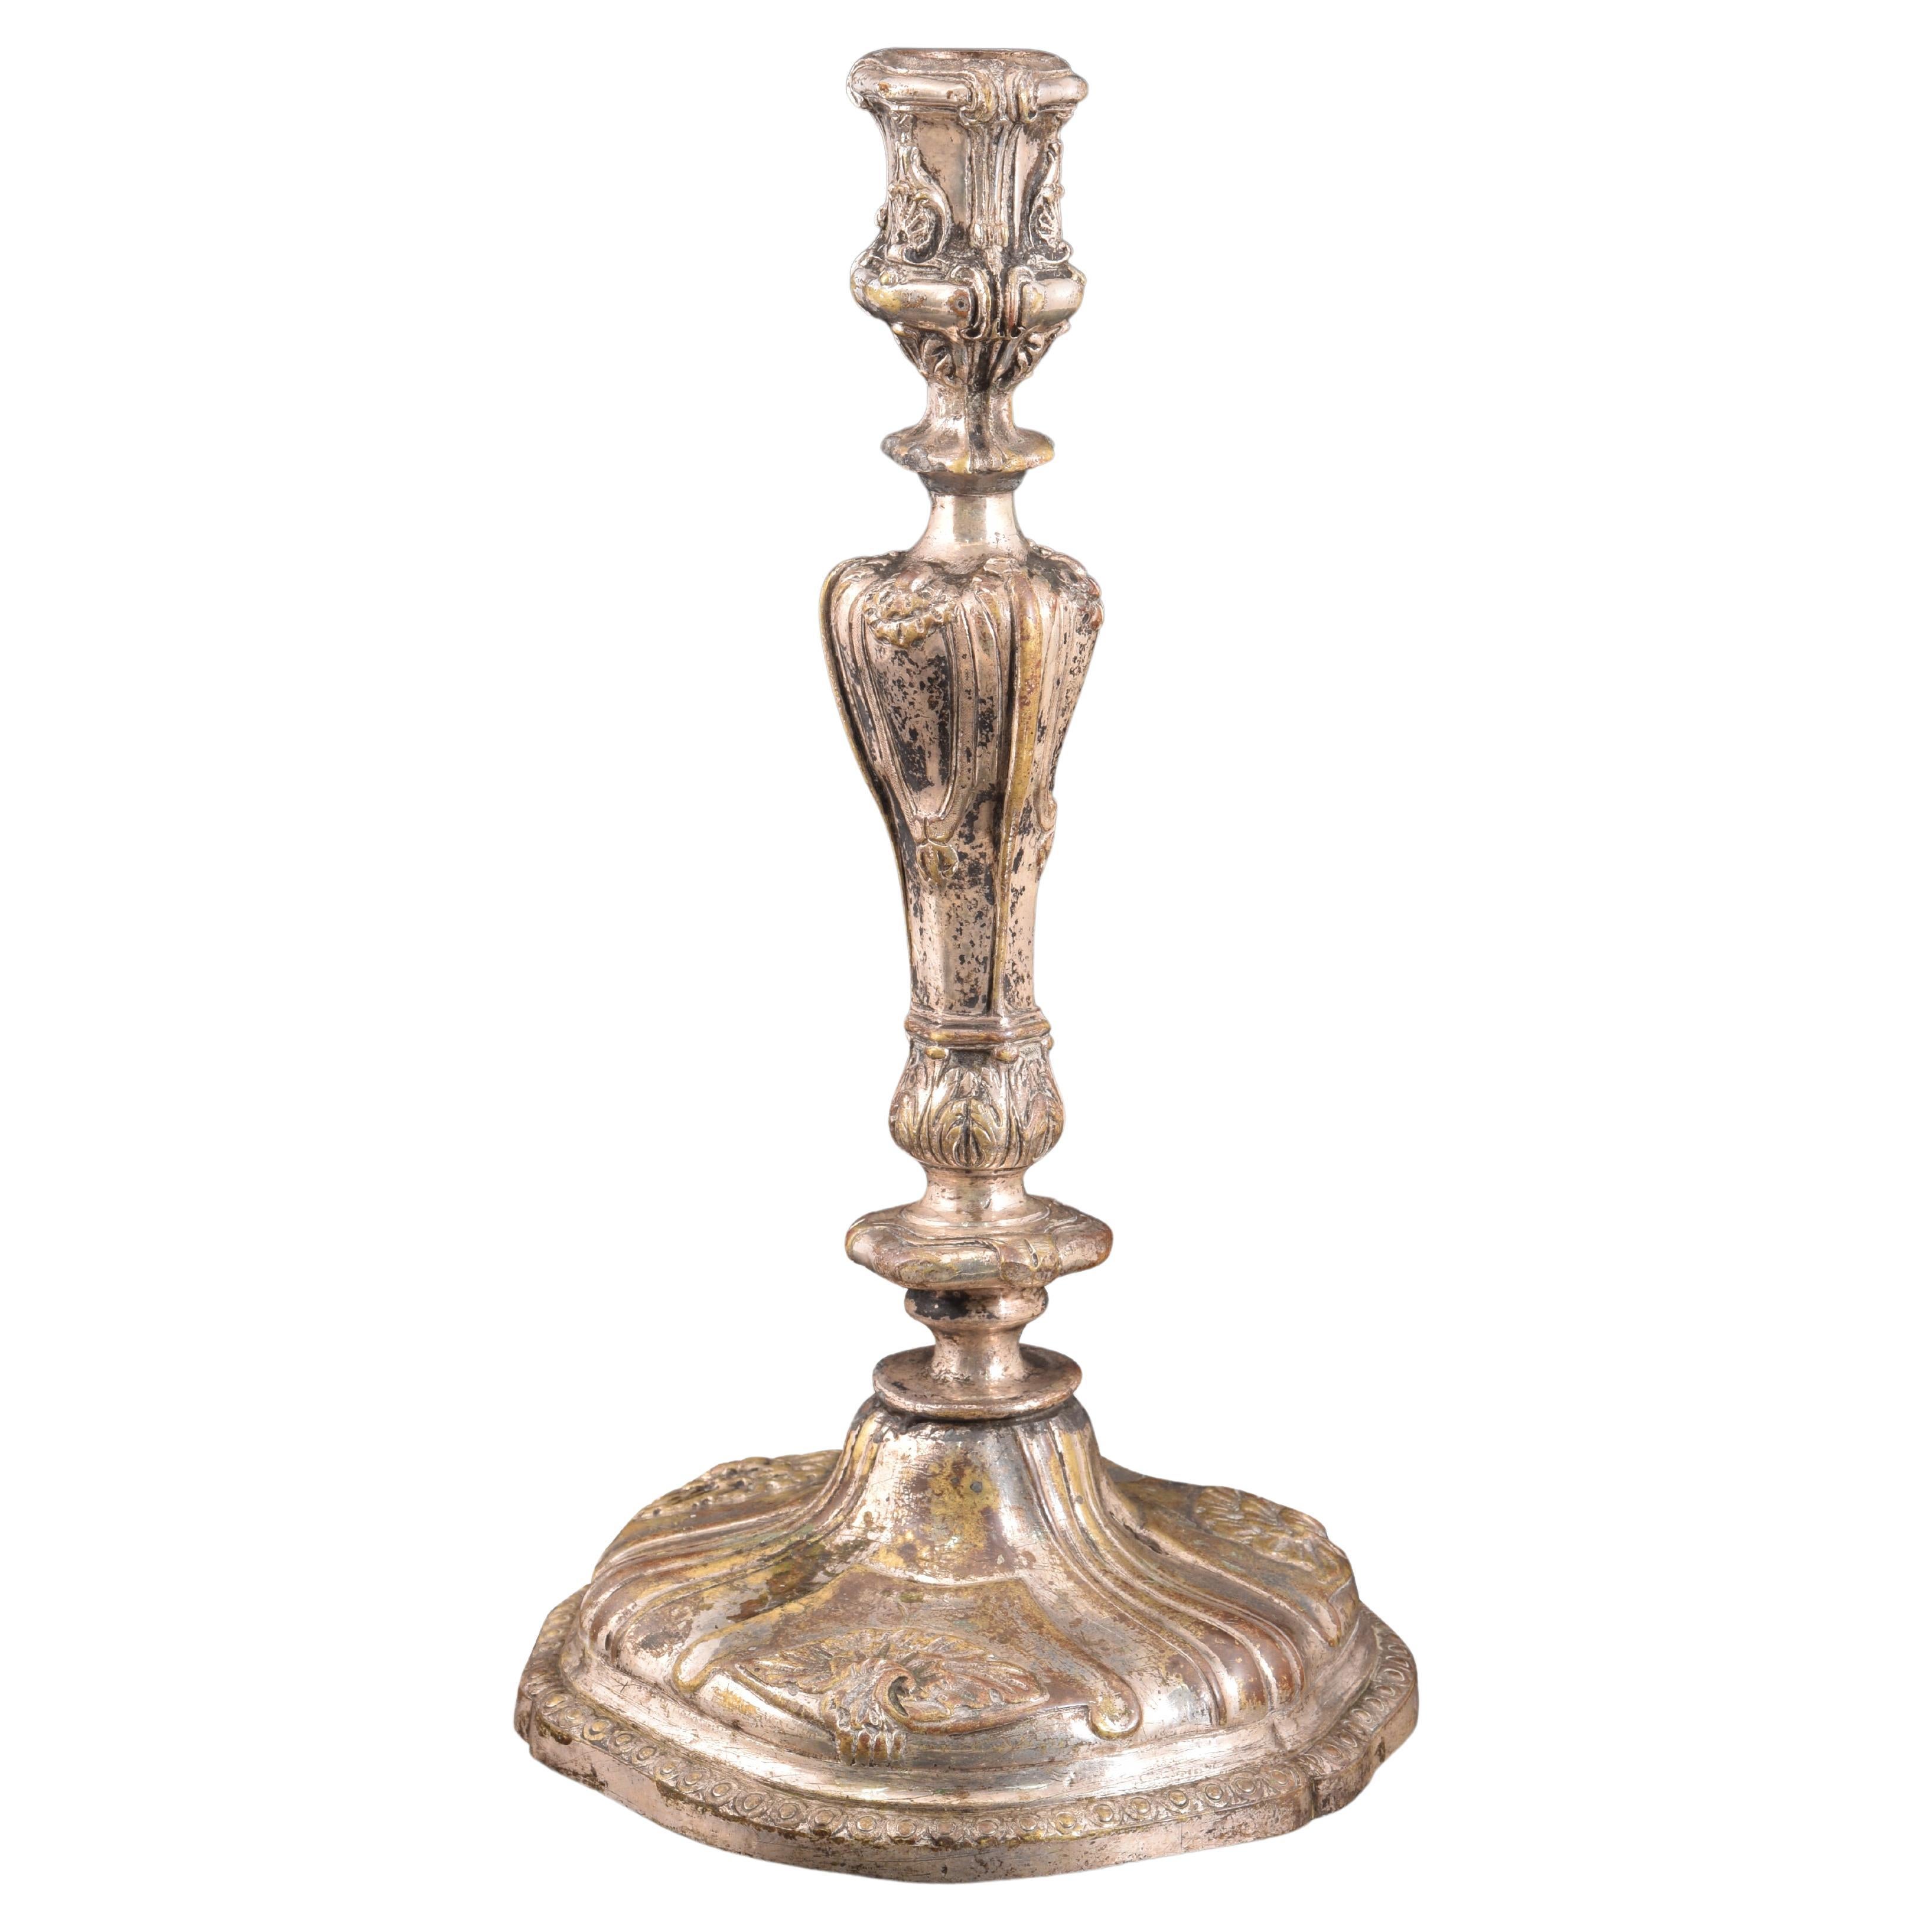 Candlestick or candle holder. Bronze. 19th century.